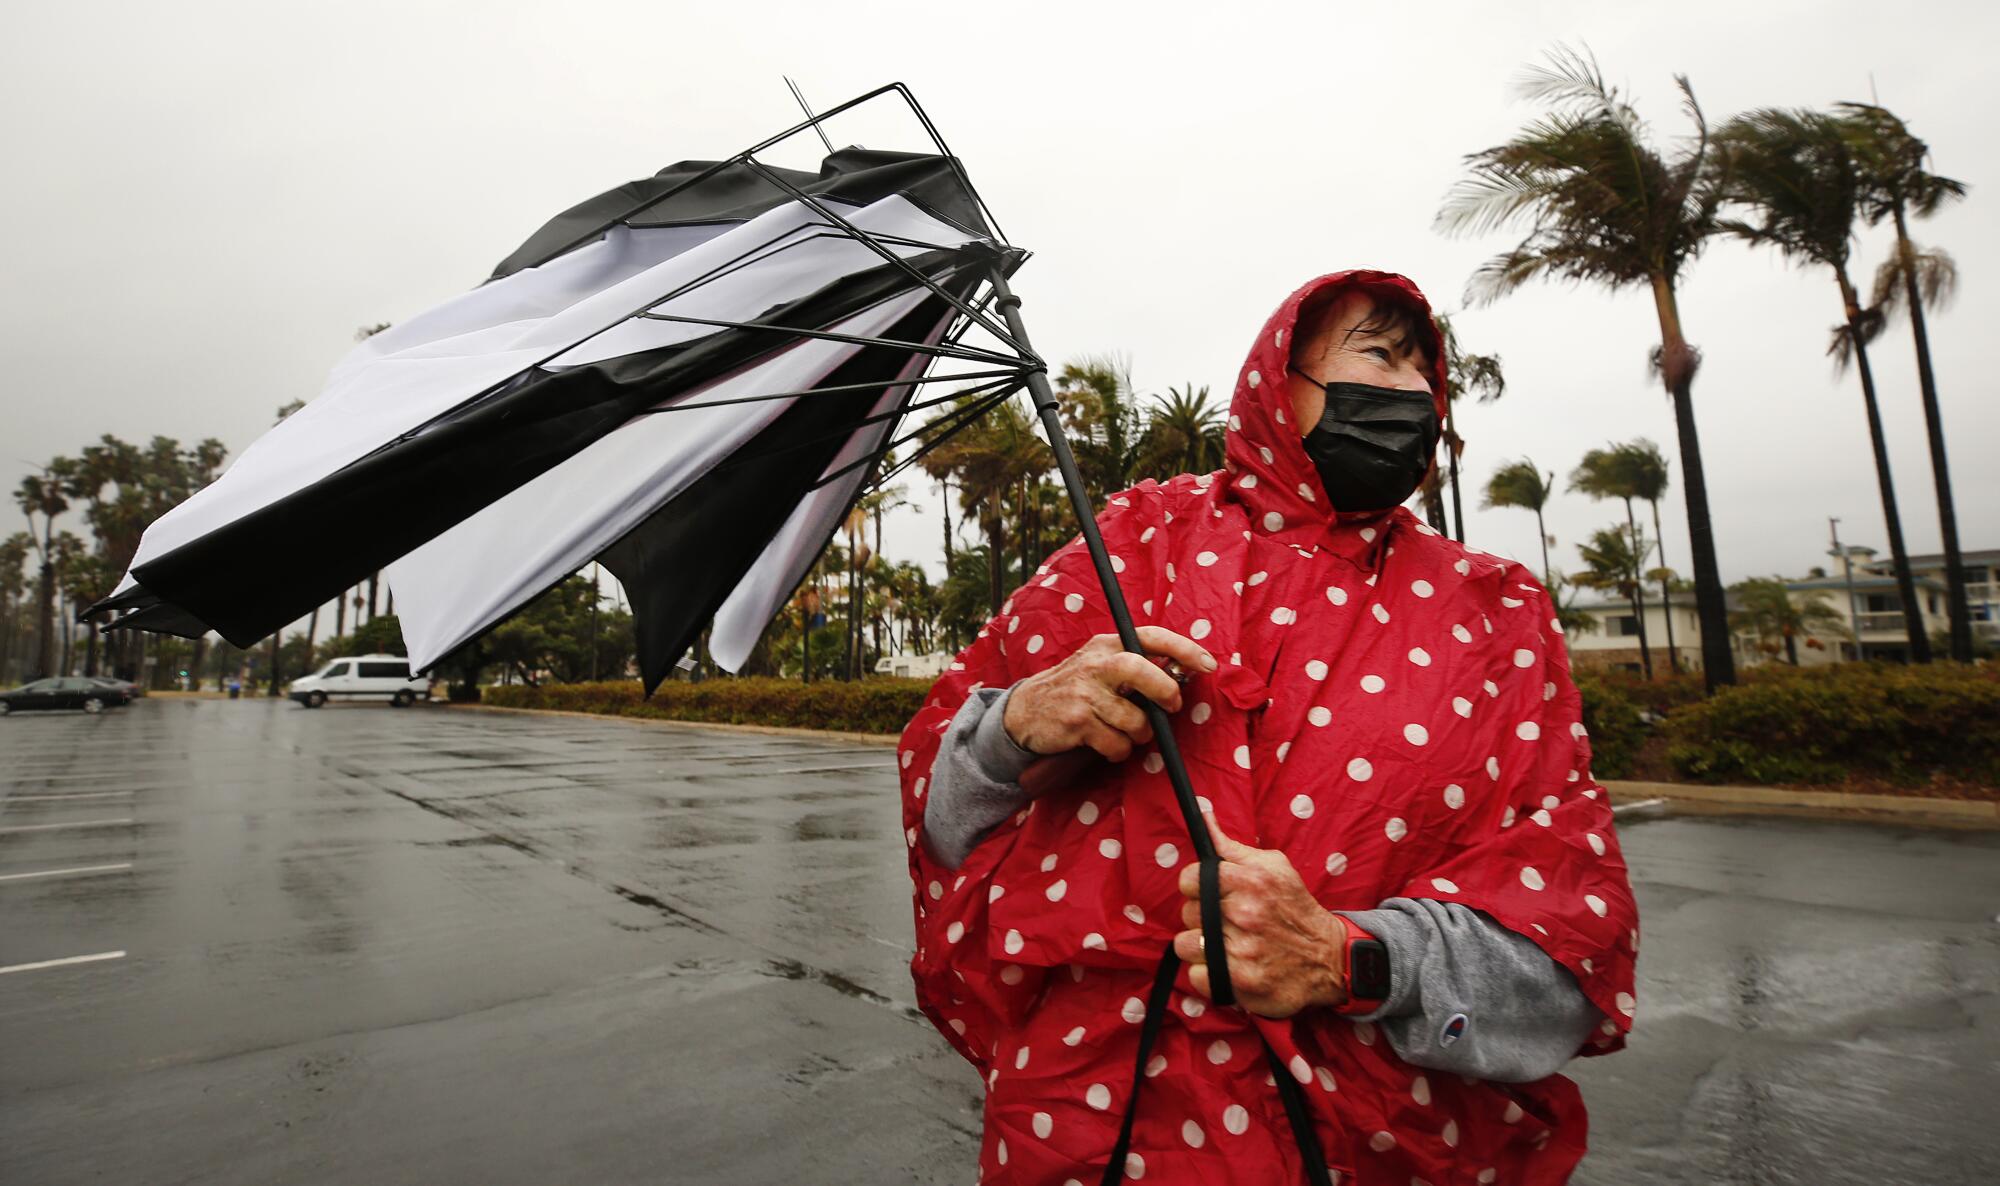 Carla LeJade's umbrella folds inside out due to the wind after a walk with a friend in Santa Barbara 